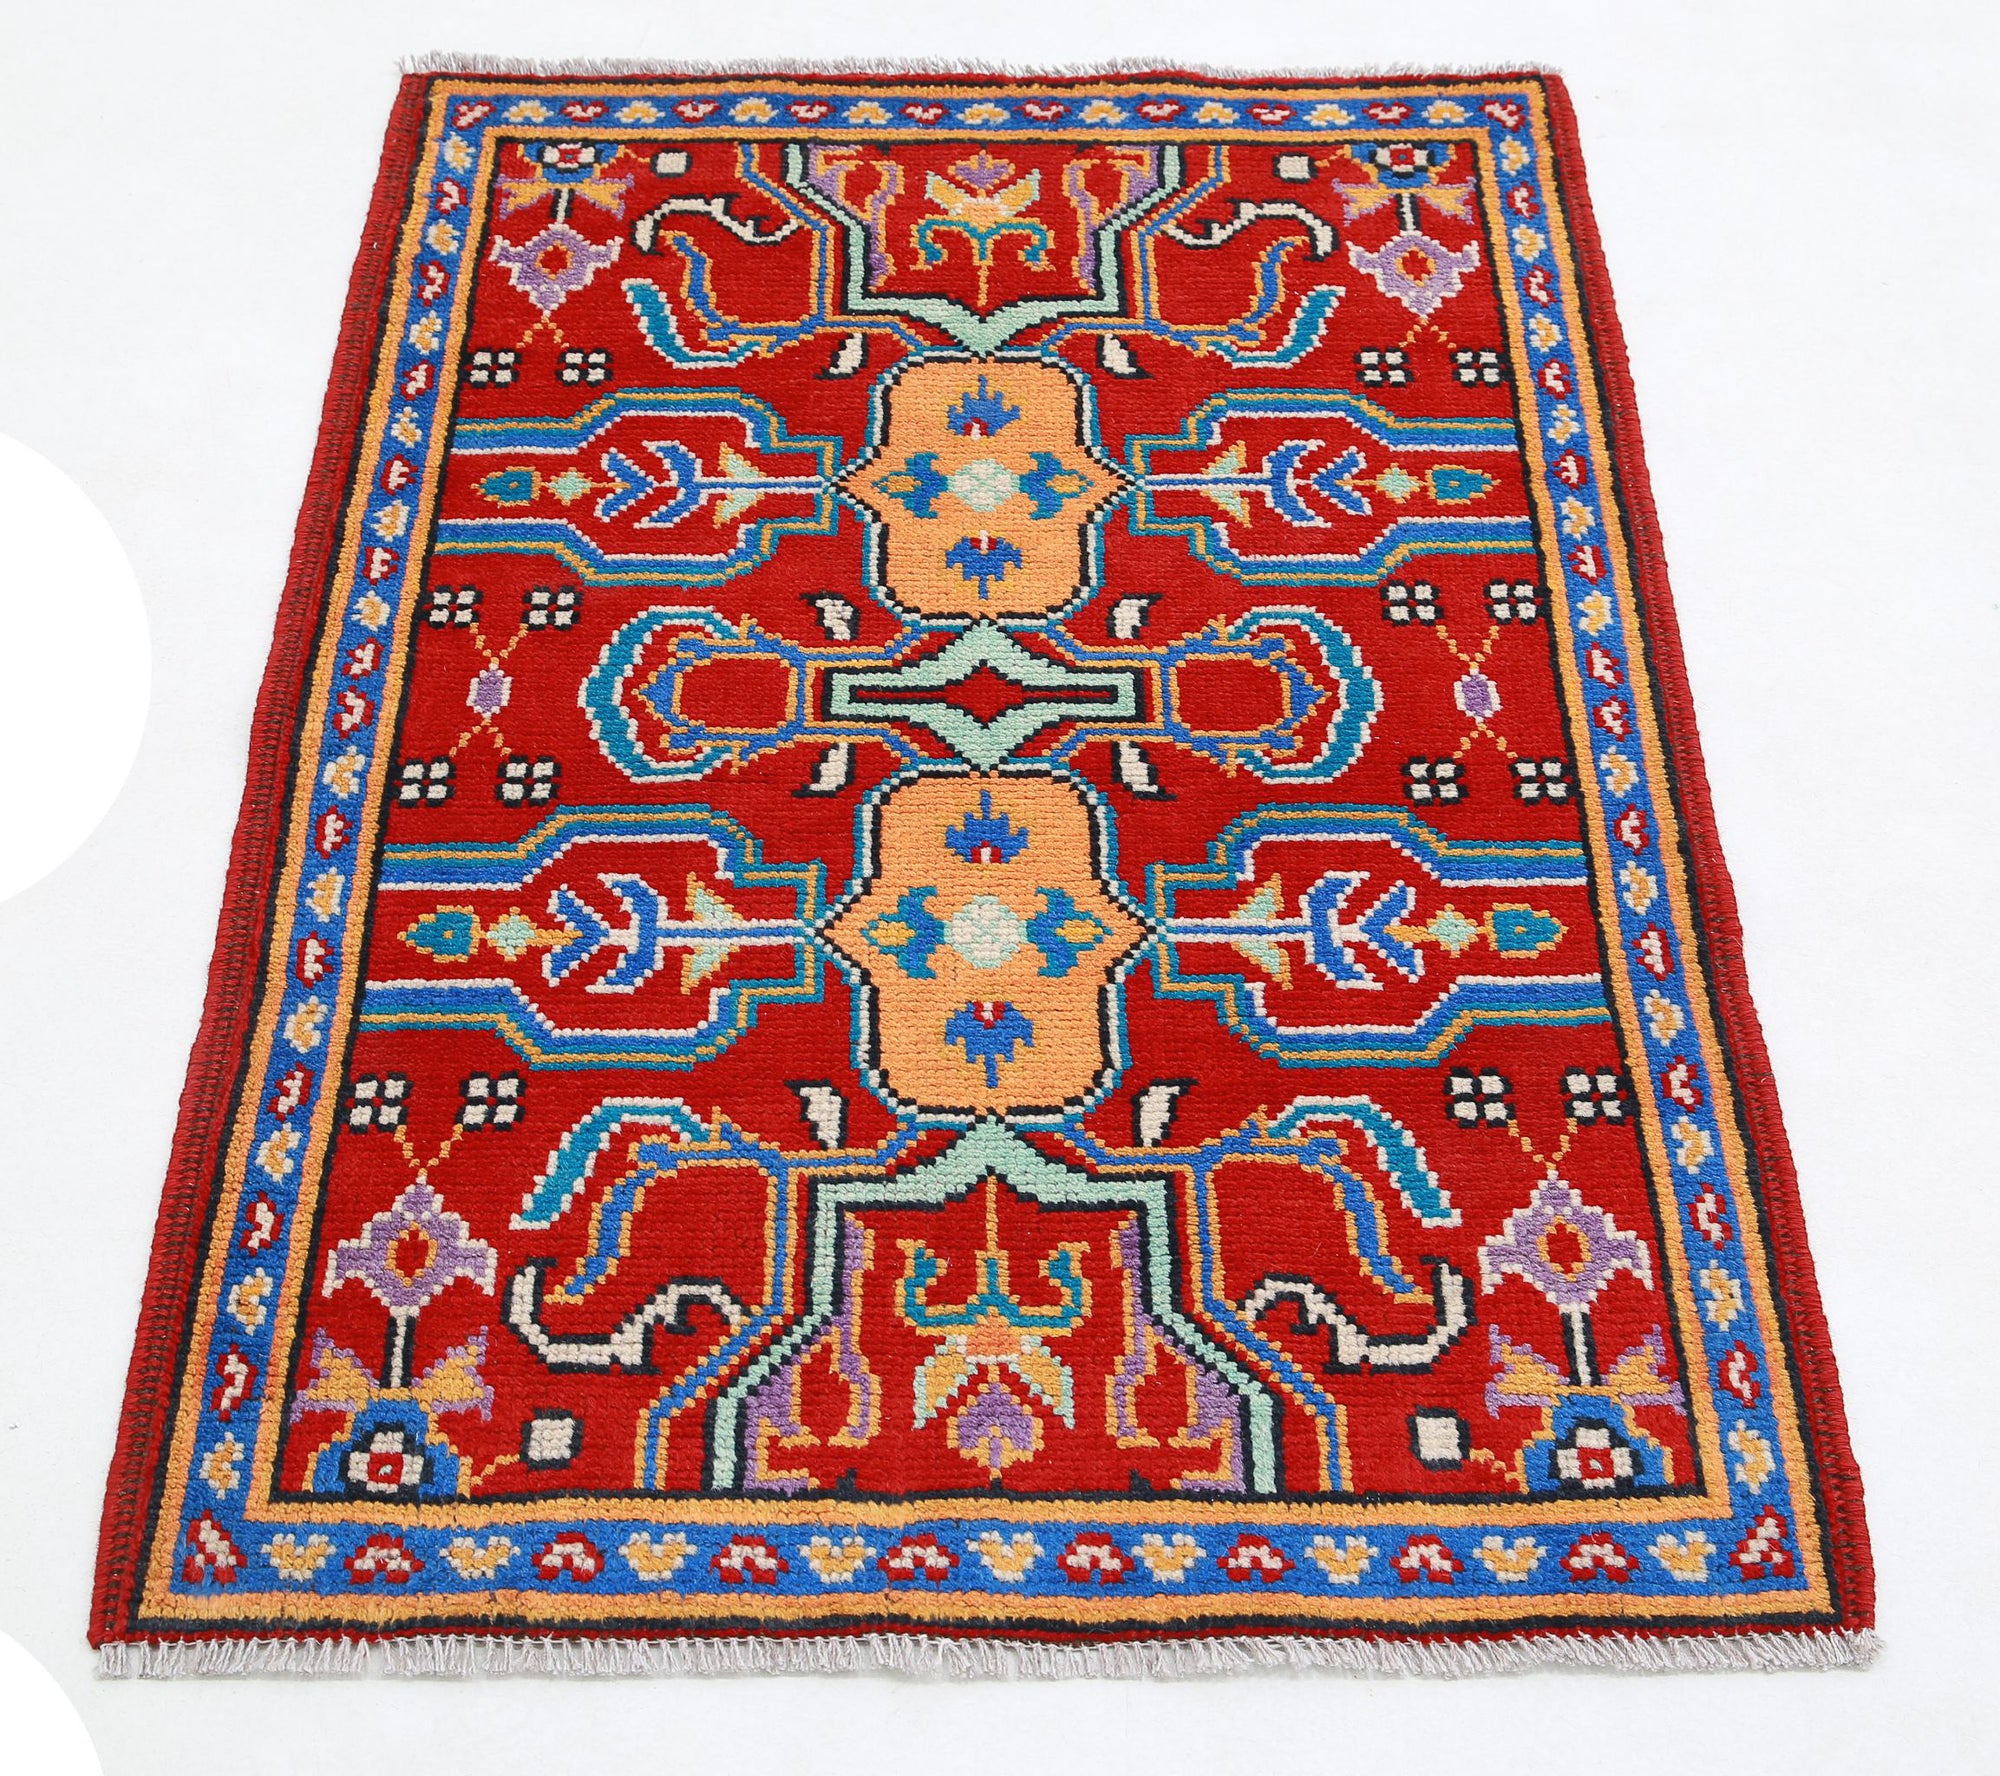 Revival-hand-knotted-qarghani-wool-rug-5014192-3.jpg